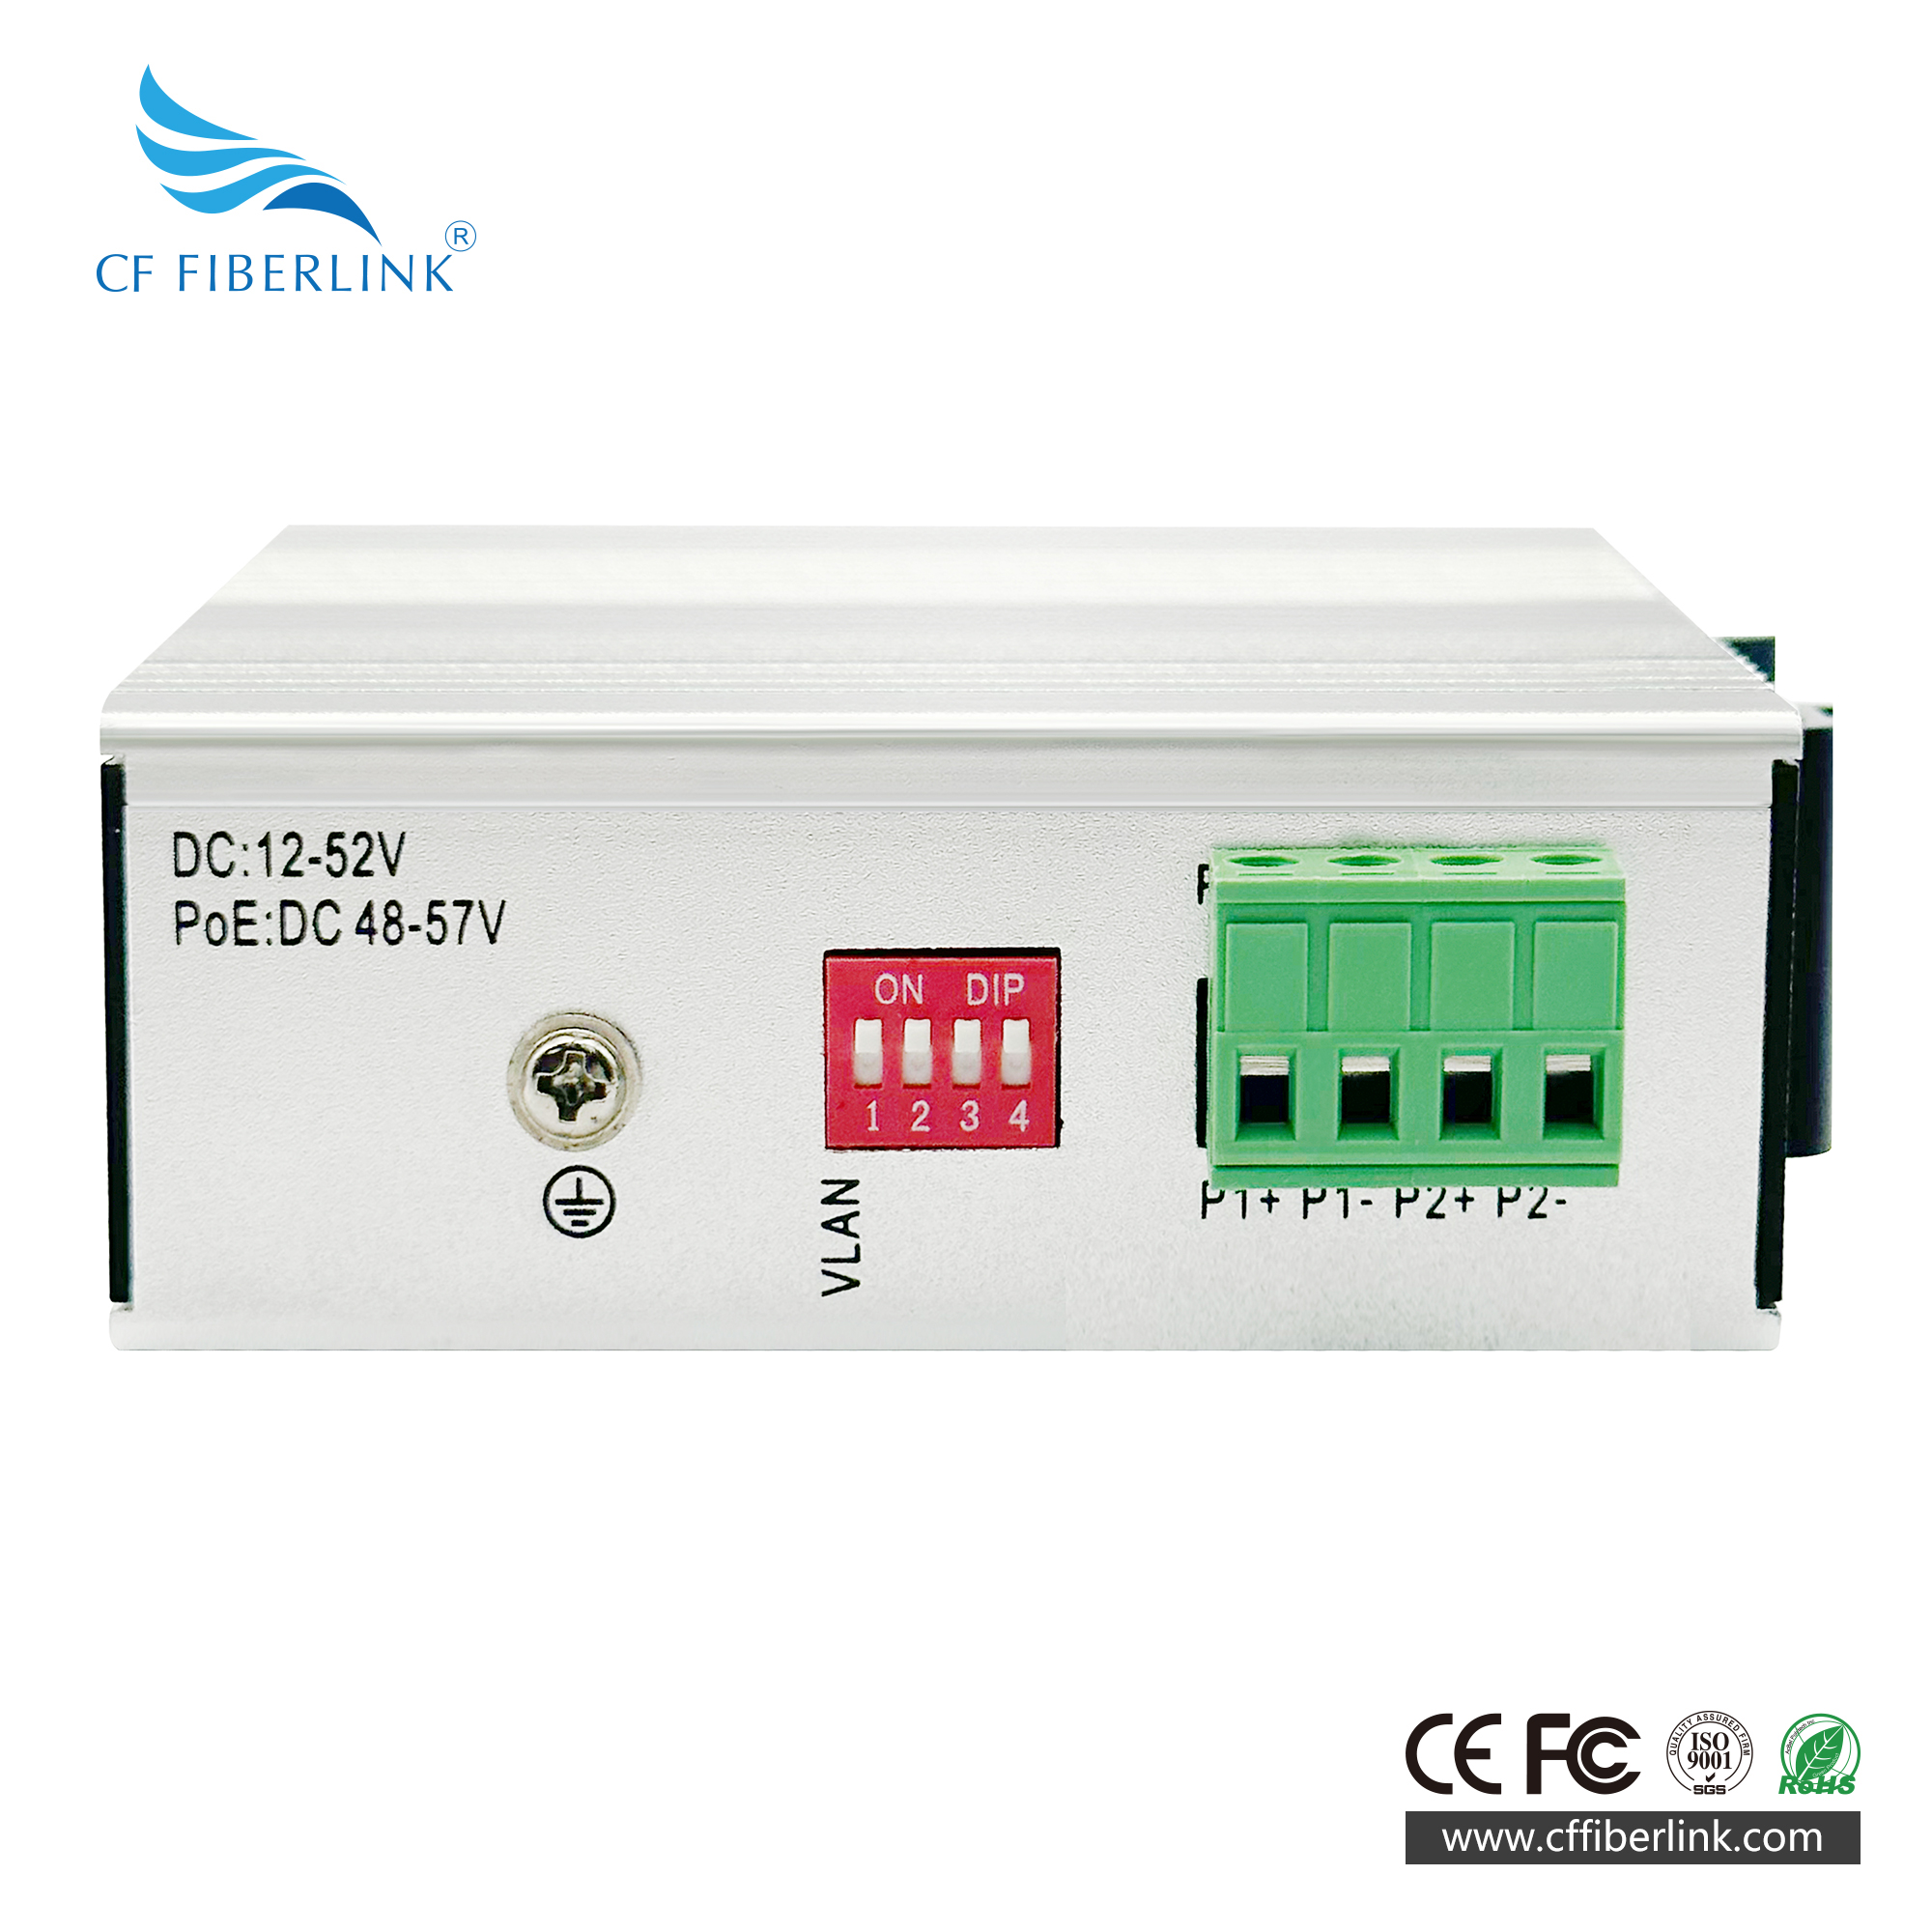 5-port 10/100M Industrial Ethernet  Switch